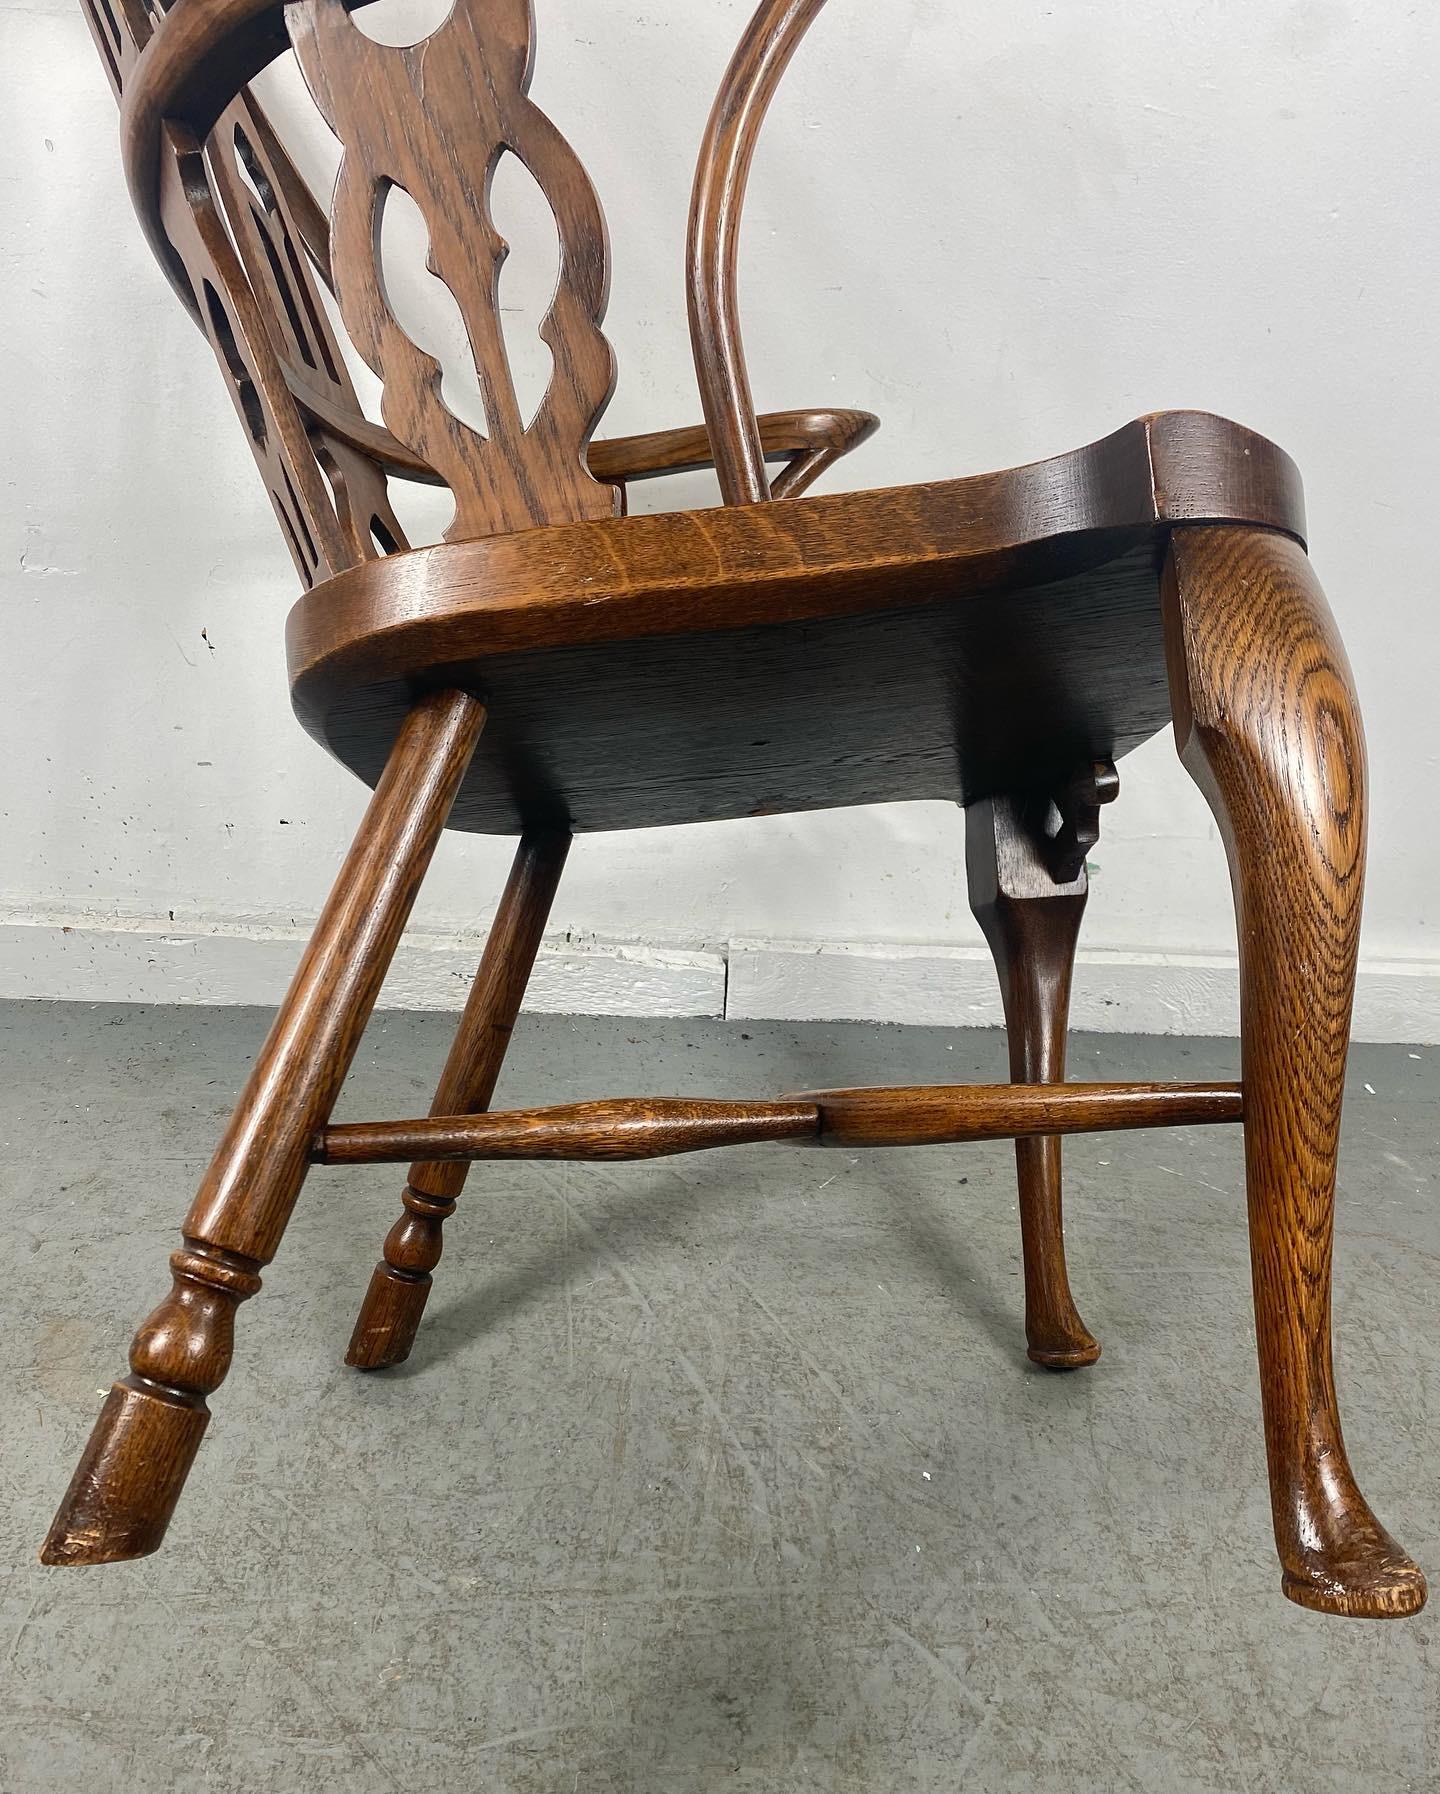 Hand-Carved Antique 19th Century Thames Valley English Gothic Windsor Chair For Sale